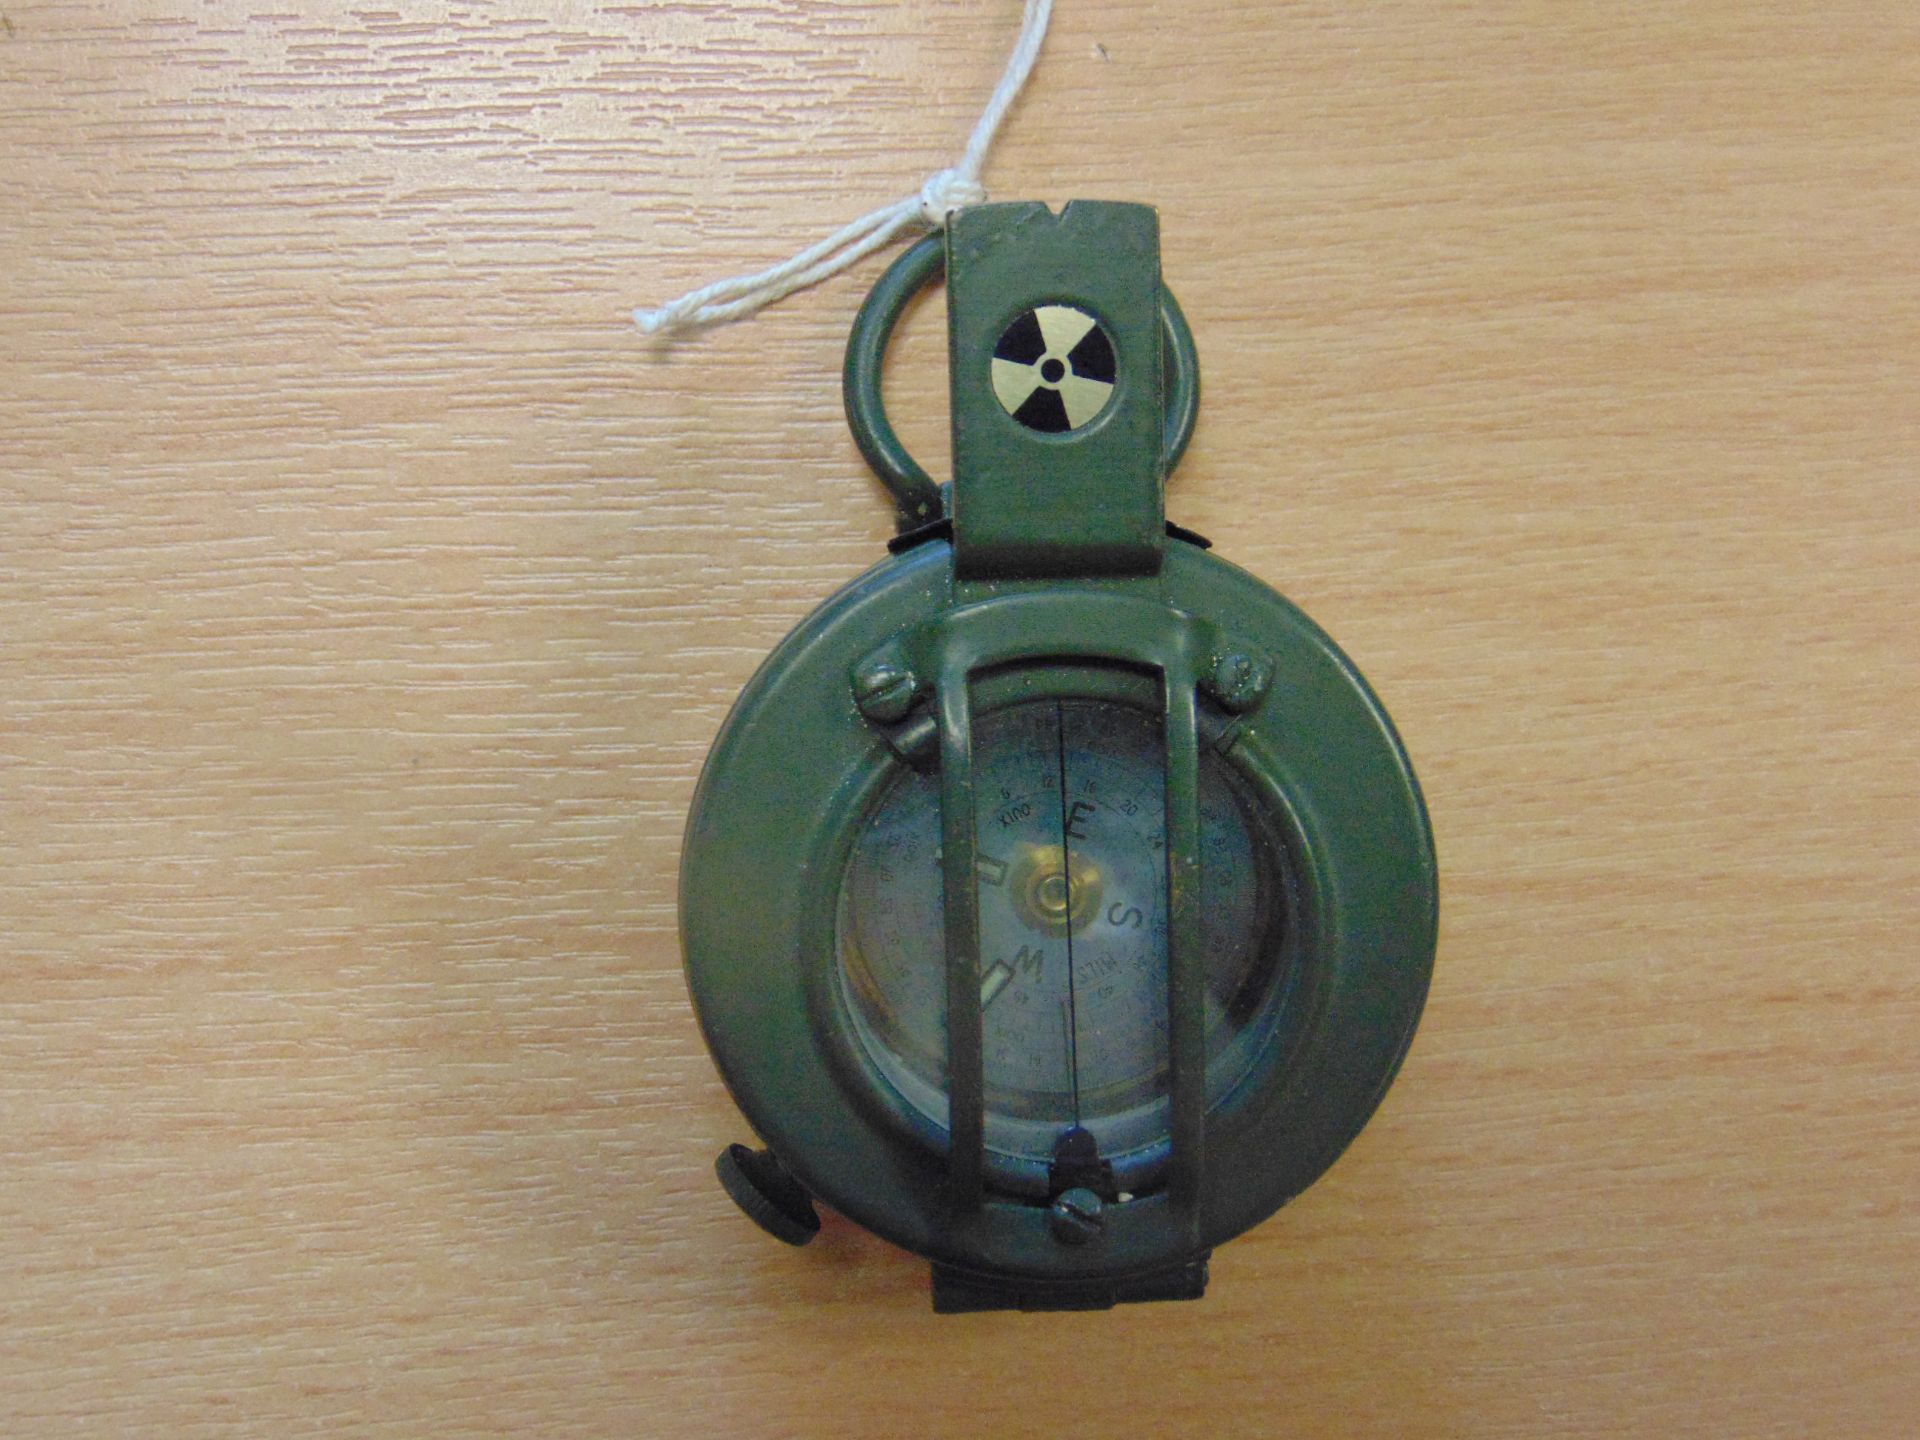 VERY NICE UNISSUED STANLEY PRISMATIC MARCHING COMPASS NATO MARKED - Image 4 of 7